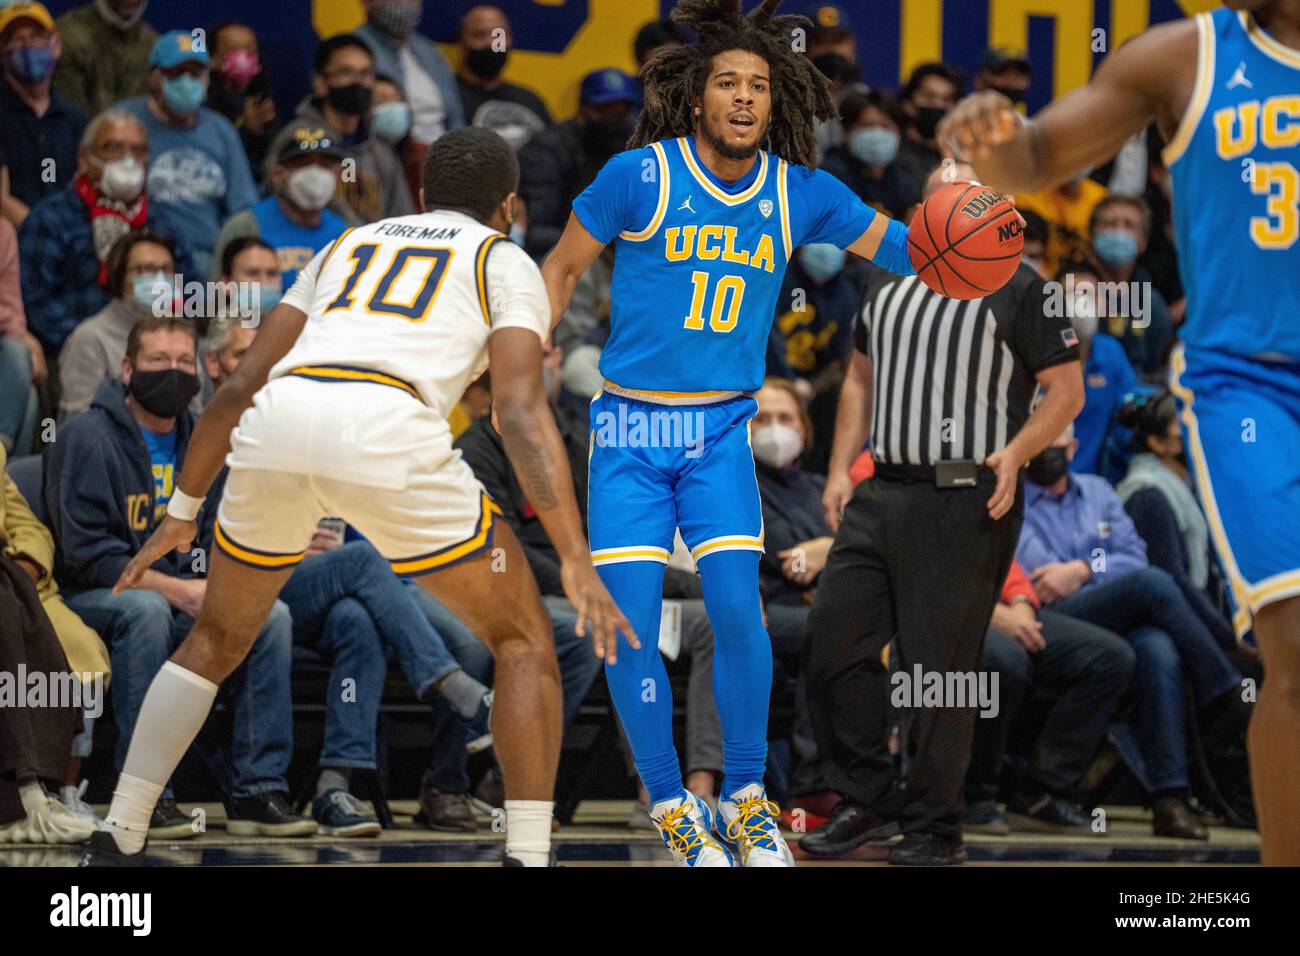 UCLA guard Tyger Campbell (10) brings the ball up court during the first half against California guard Makale Foreman (10) in Berkeley, California, Sa Stock Photo